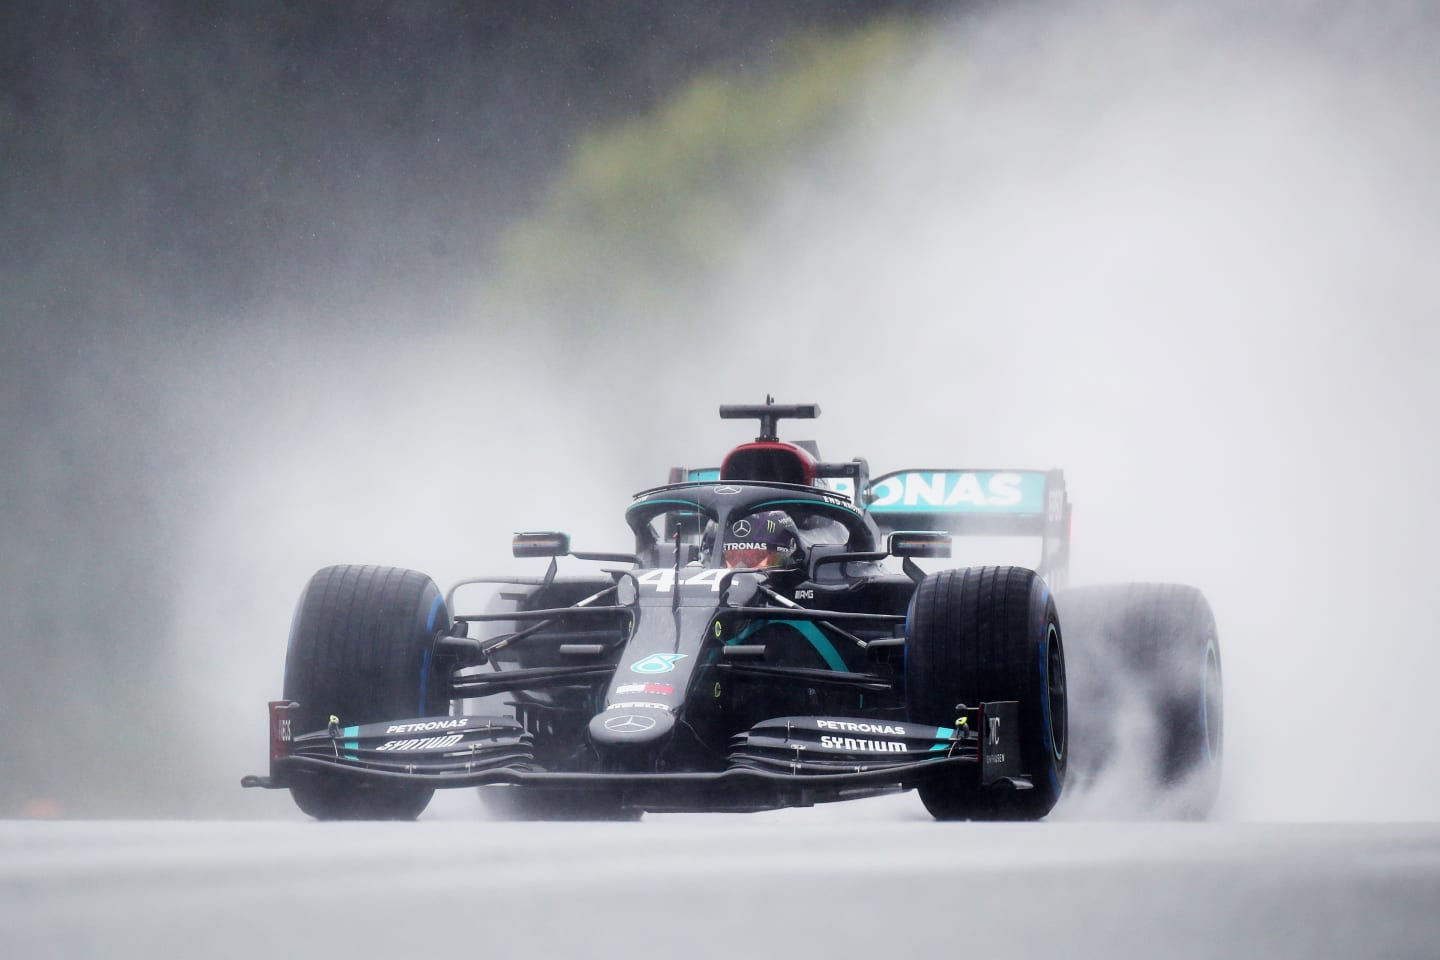 SPIELBERG, AUSTRIA - JULY 11: Lewis Hamilton of Great Britain driving the (44) Mercedes AMG Petronas F1 Team Mercedes W11 on track during qualifying for the Formula One Grand Prix of Styria at Red Bull Ring on July 11, 2020 in Spielberg, Austria. (Photo by Mark Thompson/Getty Images)